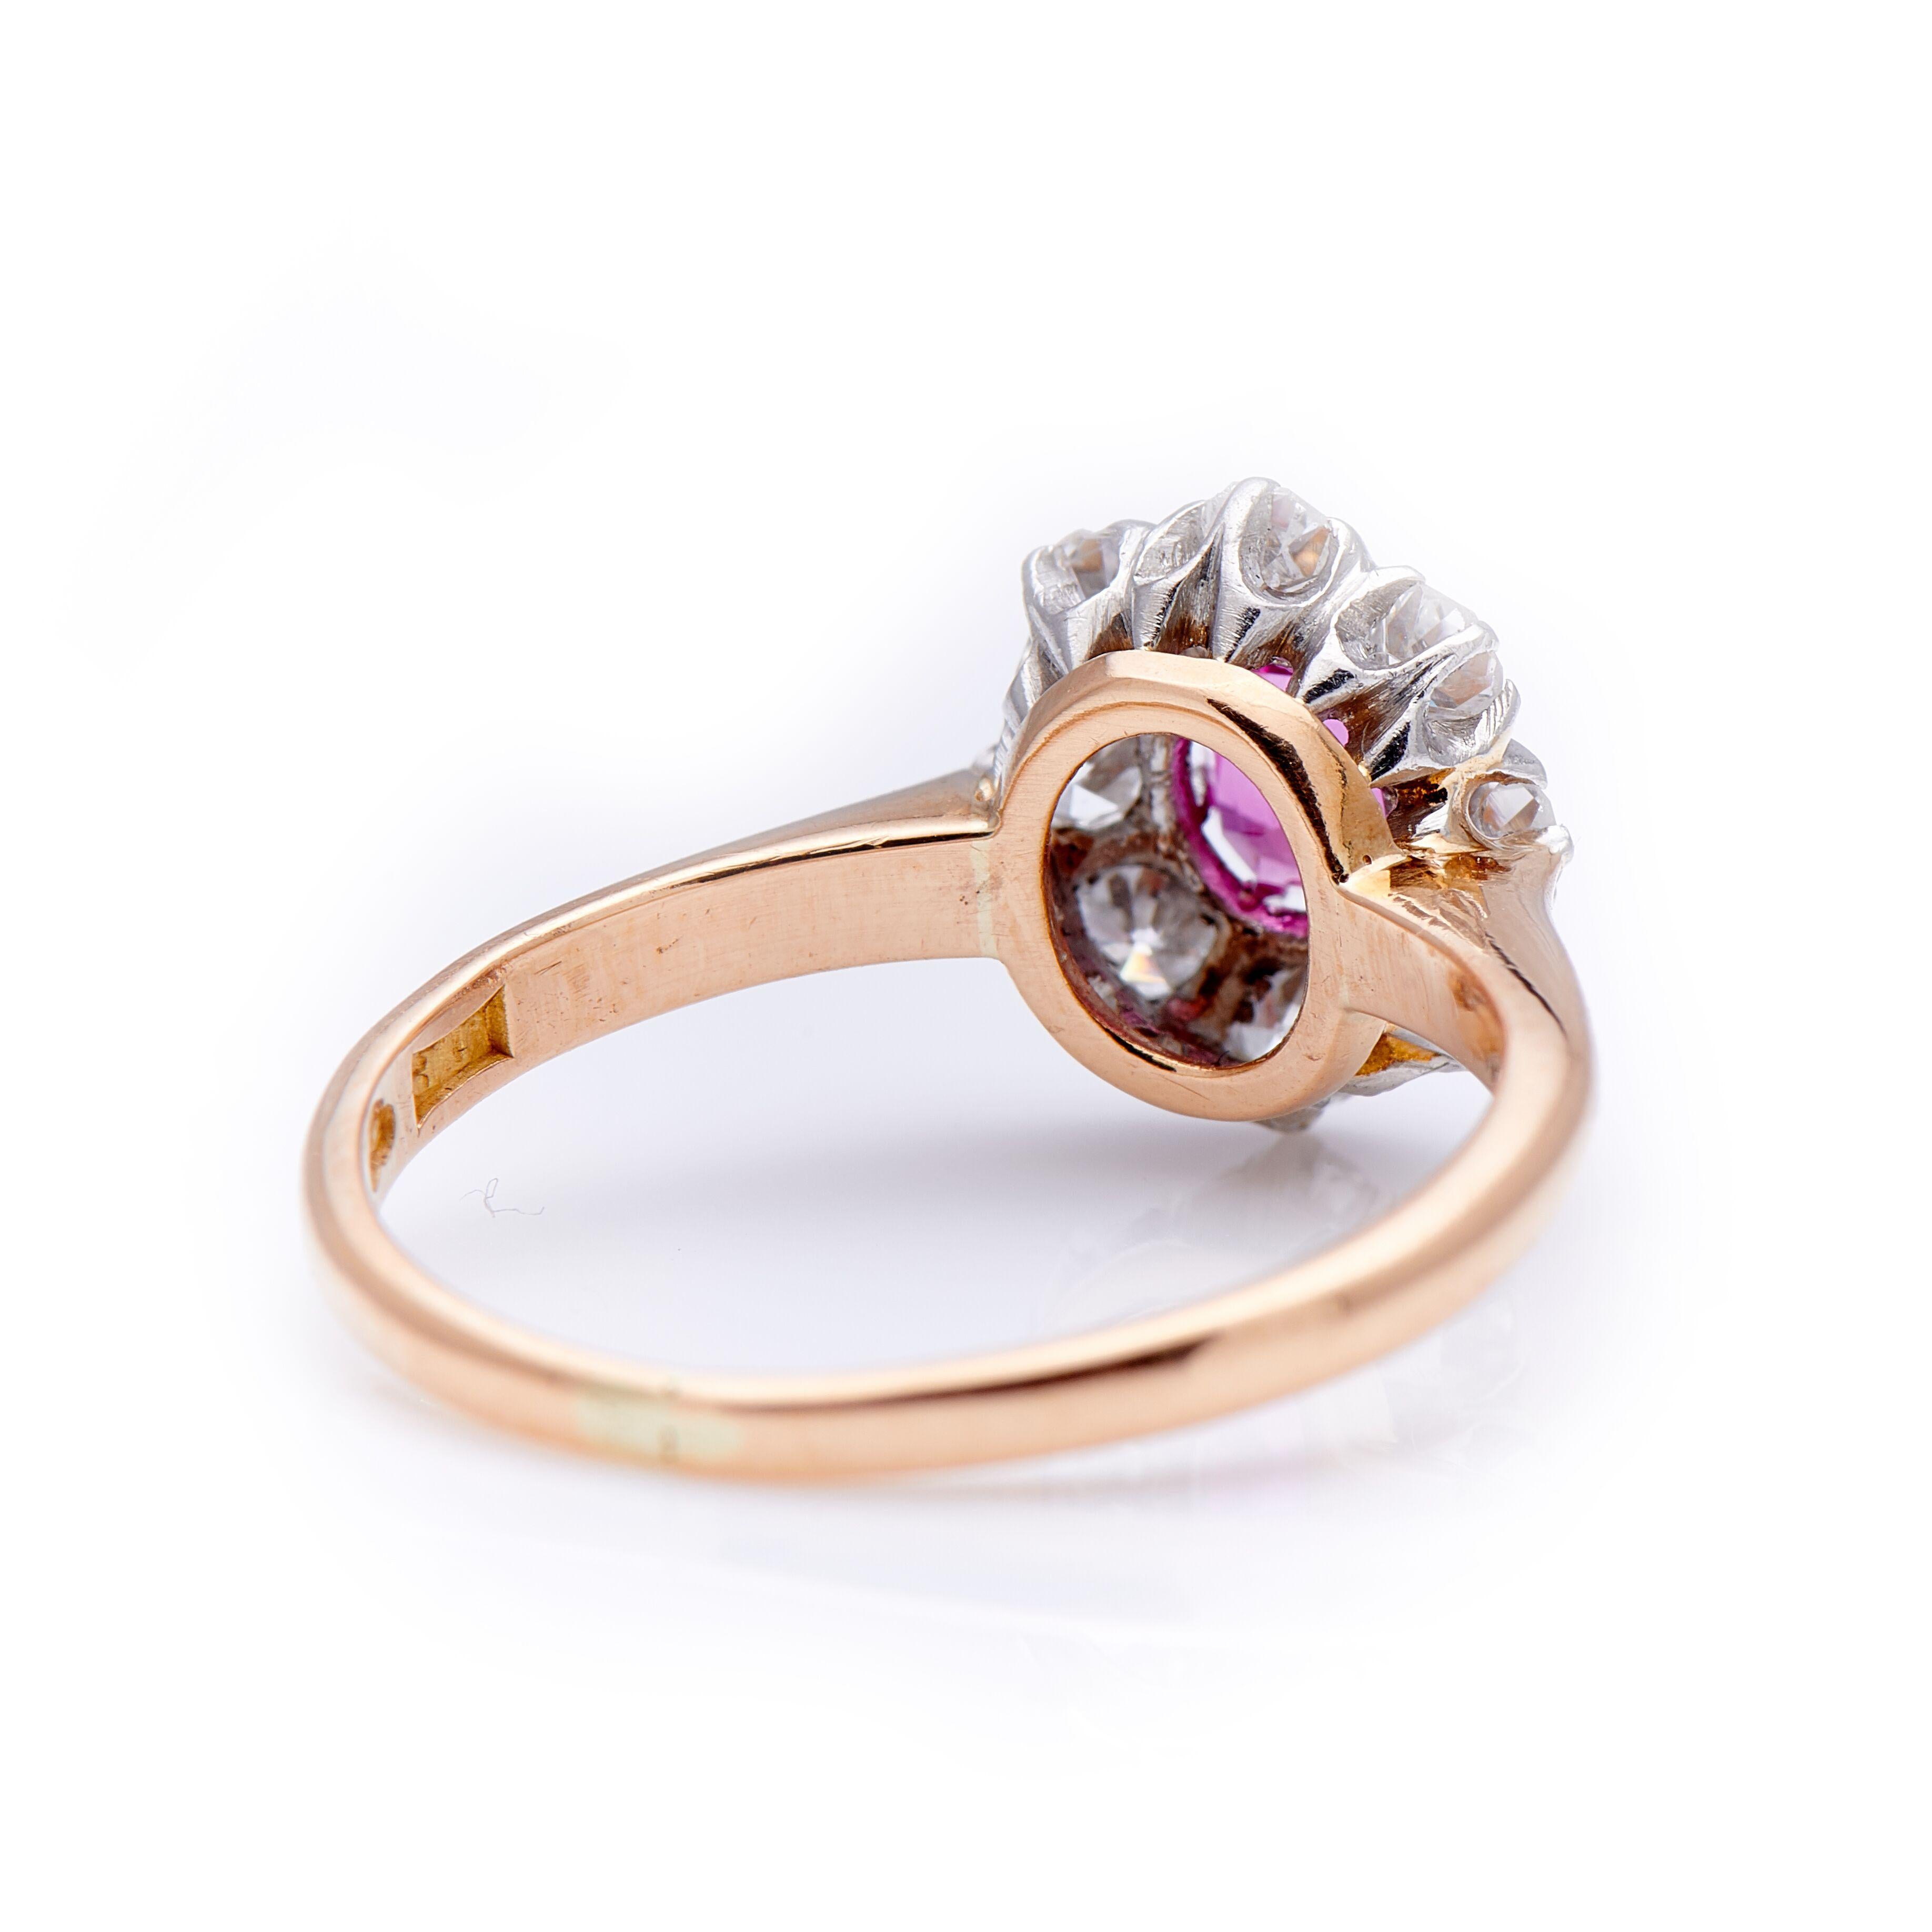 Art Deco, pink sapphire and diamond cluster ring, circa 1920. A very pretty pink sapphire centre with a delicate old-cut diamond surround all set in platinum style claw setting. The sapphire is vibrant shade of pink, a wonderful contrast to the